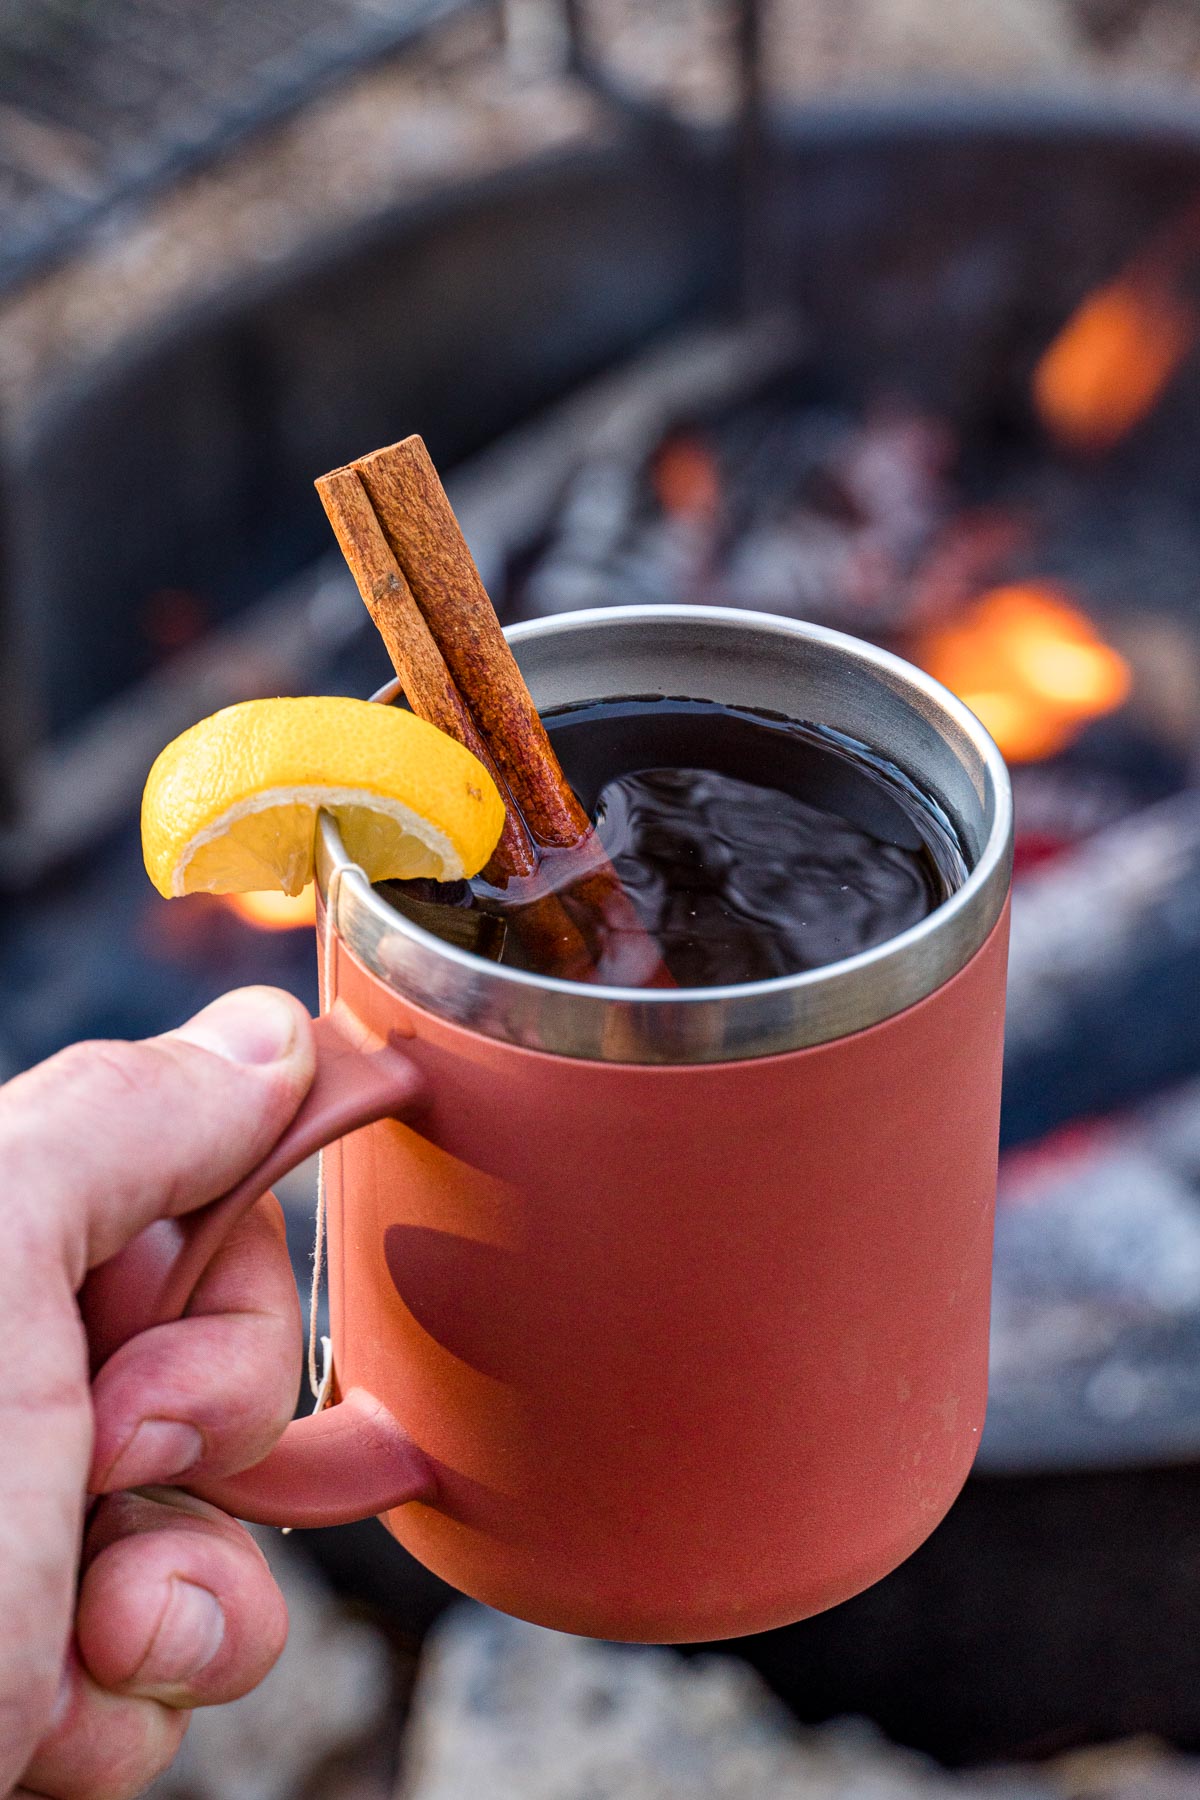 Hand holding a mug of hot toddy with a cinnamon stick and lemon slice